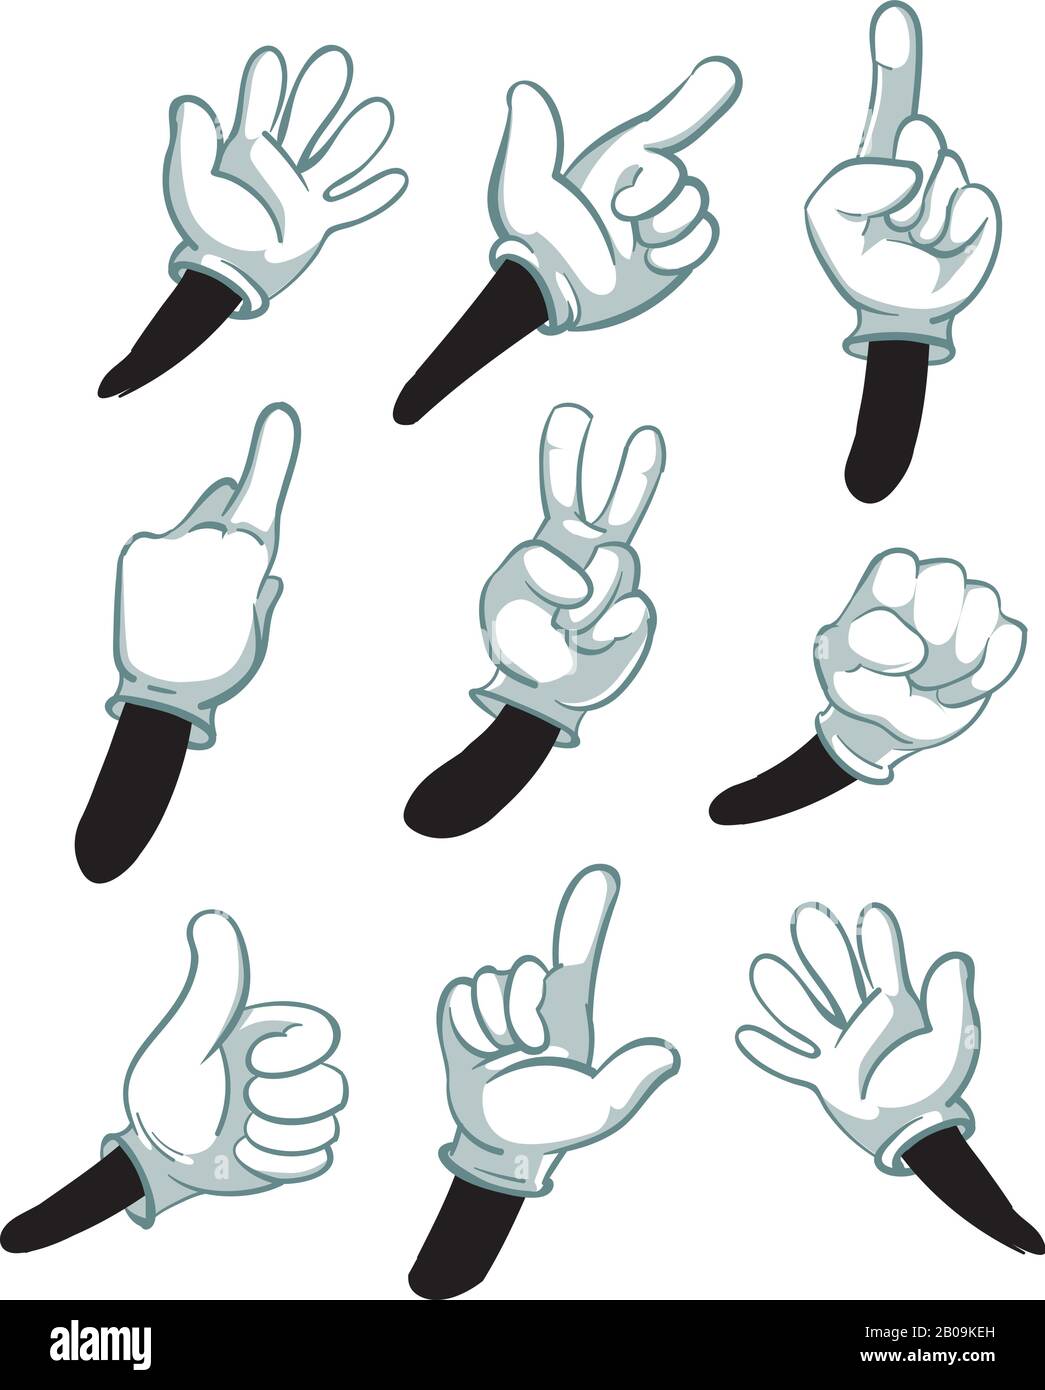 Cartoon arms, gloved hands. parts of body vector illustration. Hand in white gloves, collection of hand gestures Stock Vector